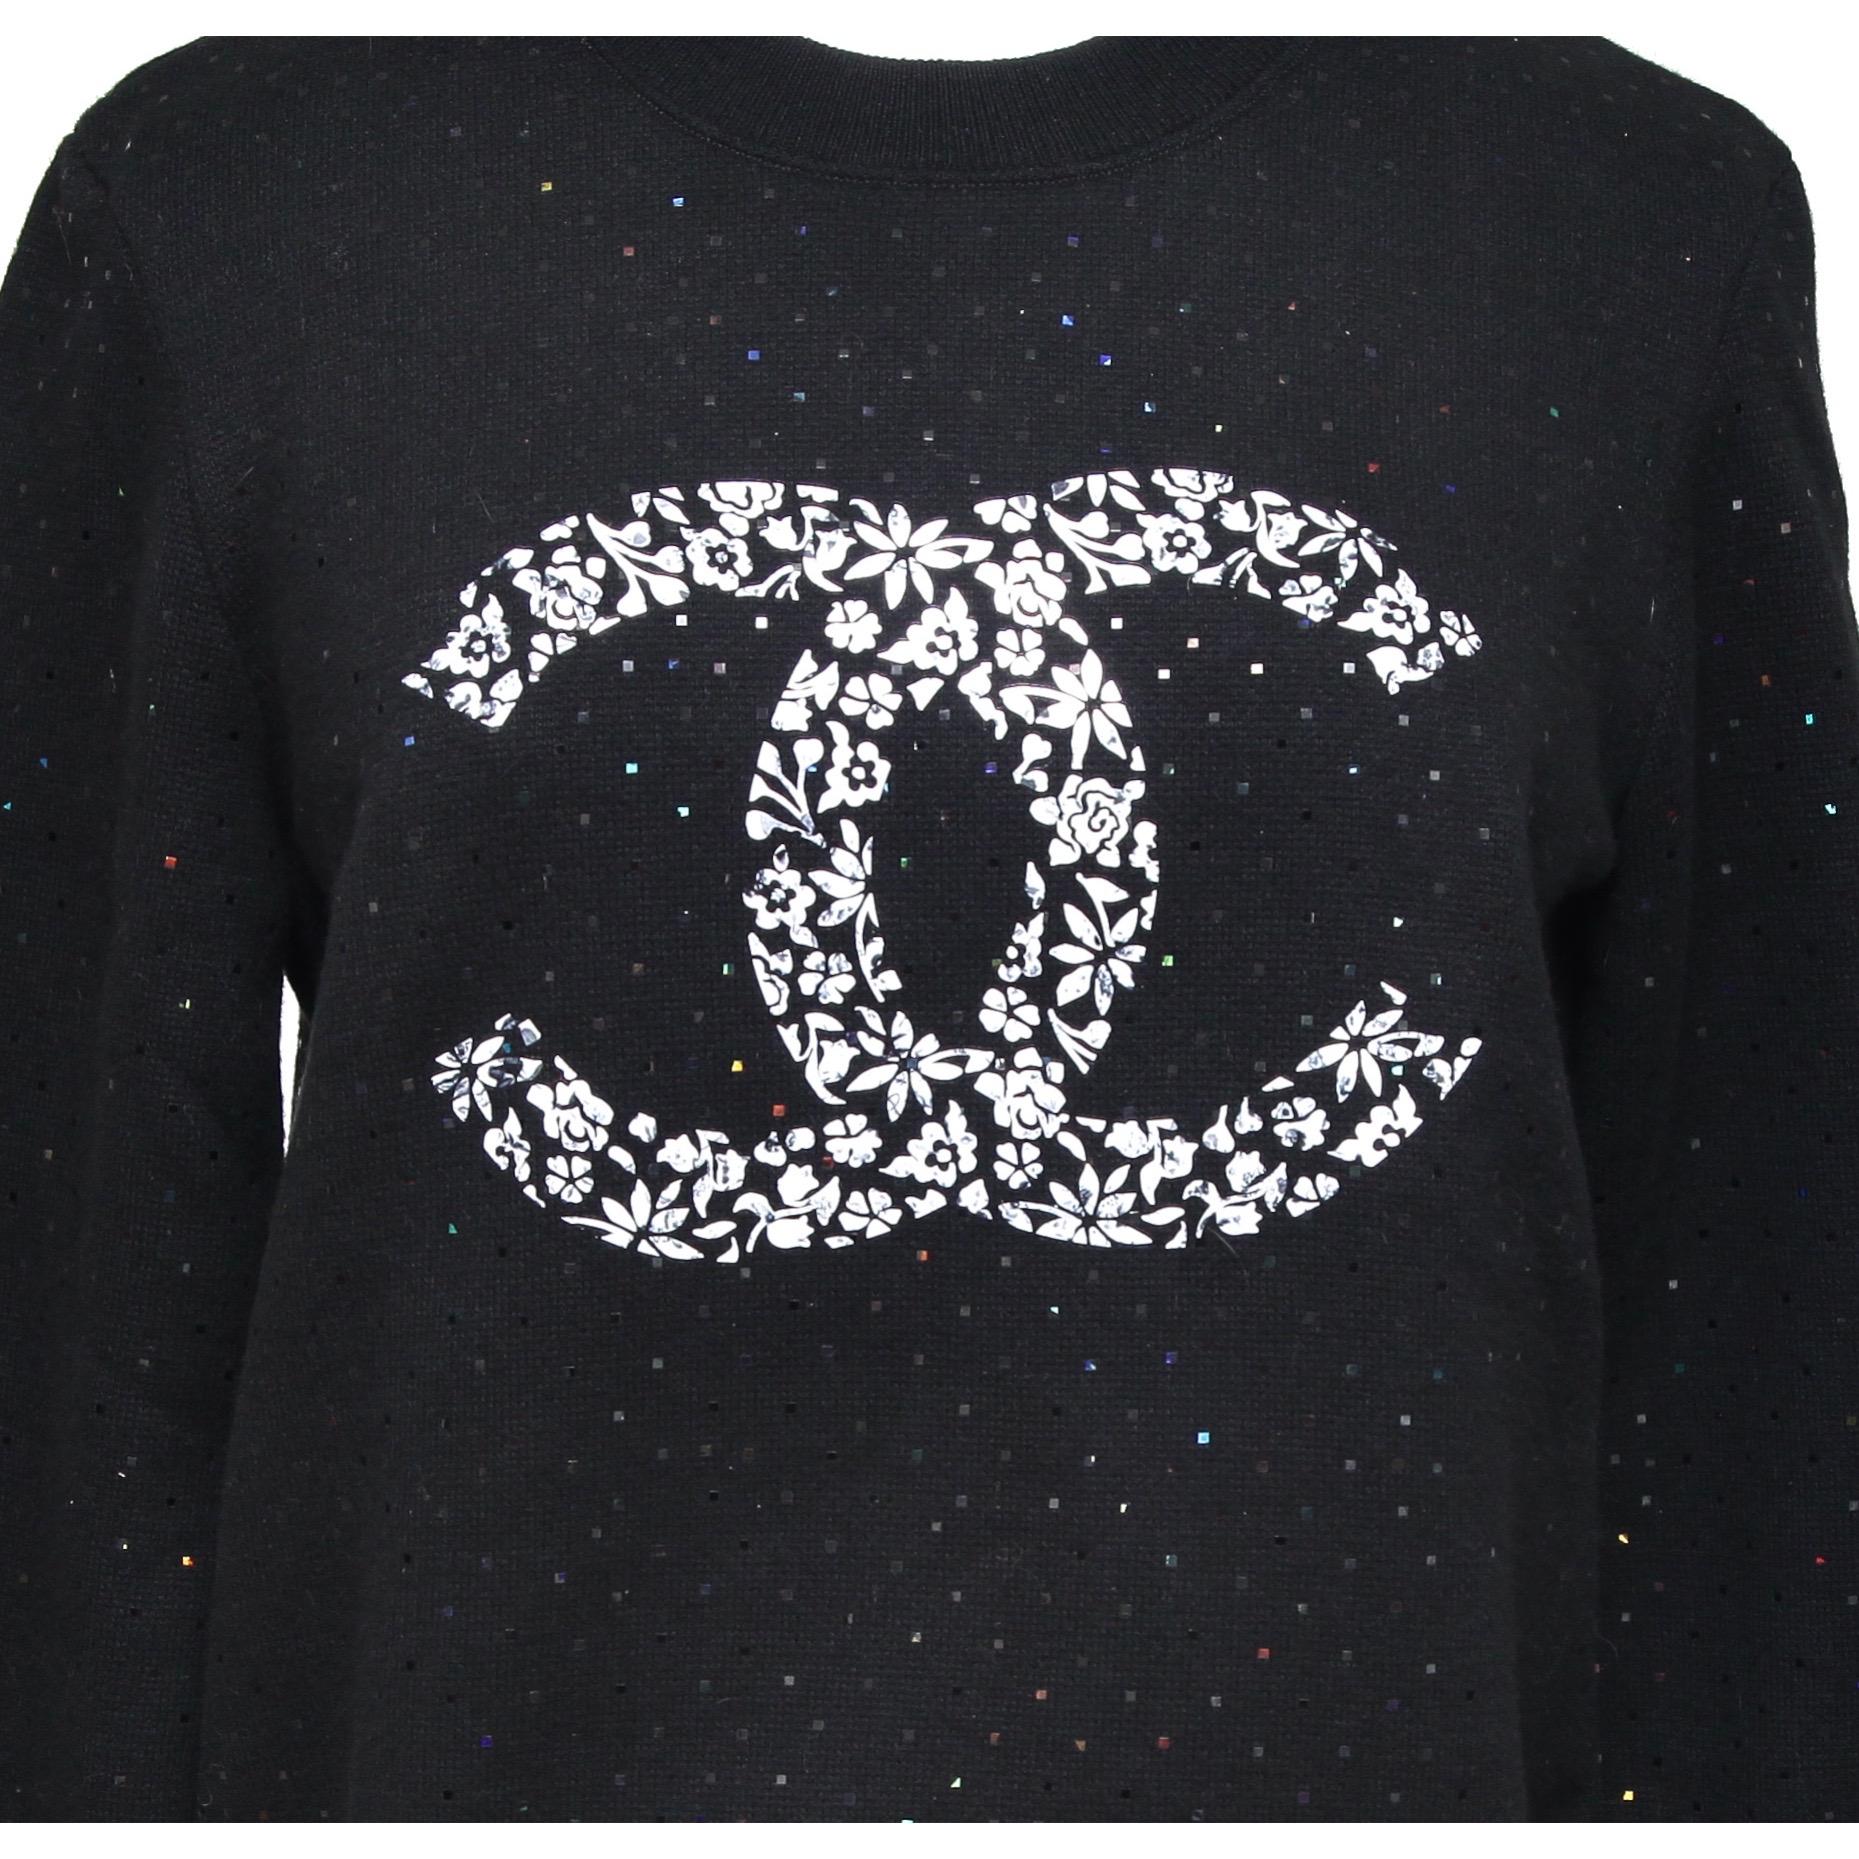 GUARANTEED AUTHENTIC CHANEL 2021 CC LOGO LONG SLEEVE SWEATER

Design:
- From the Spring 2021 collection long sleeve black cotton sweater.
- Large white CC graphic logo at front with iridescent accent throughout.
- Pullover, crew neck.
- Long